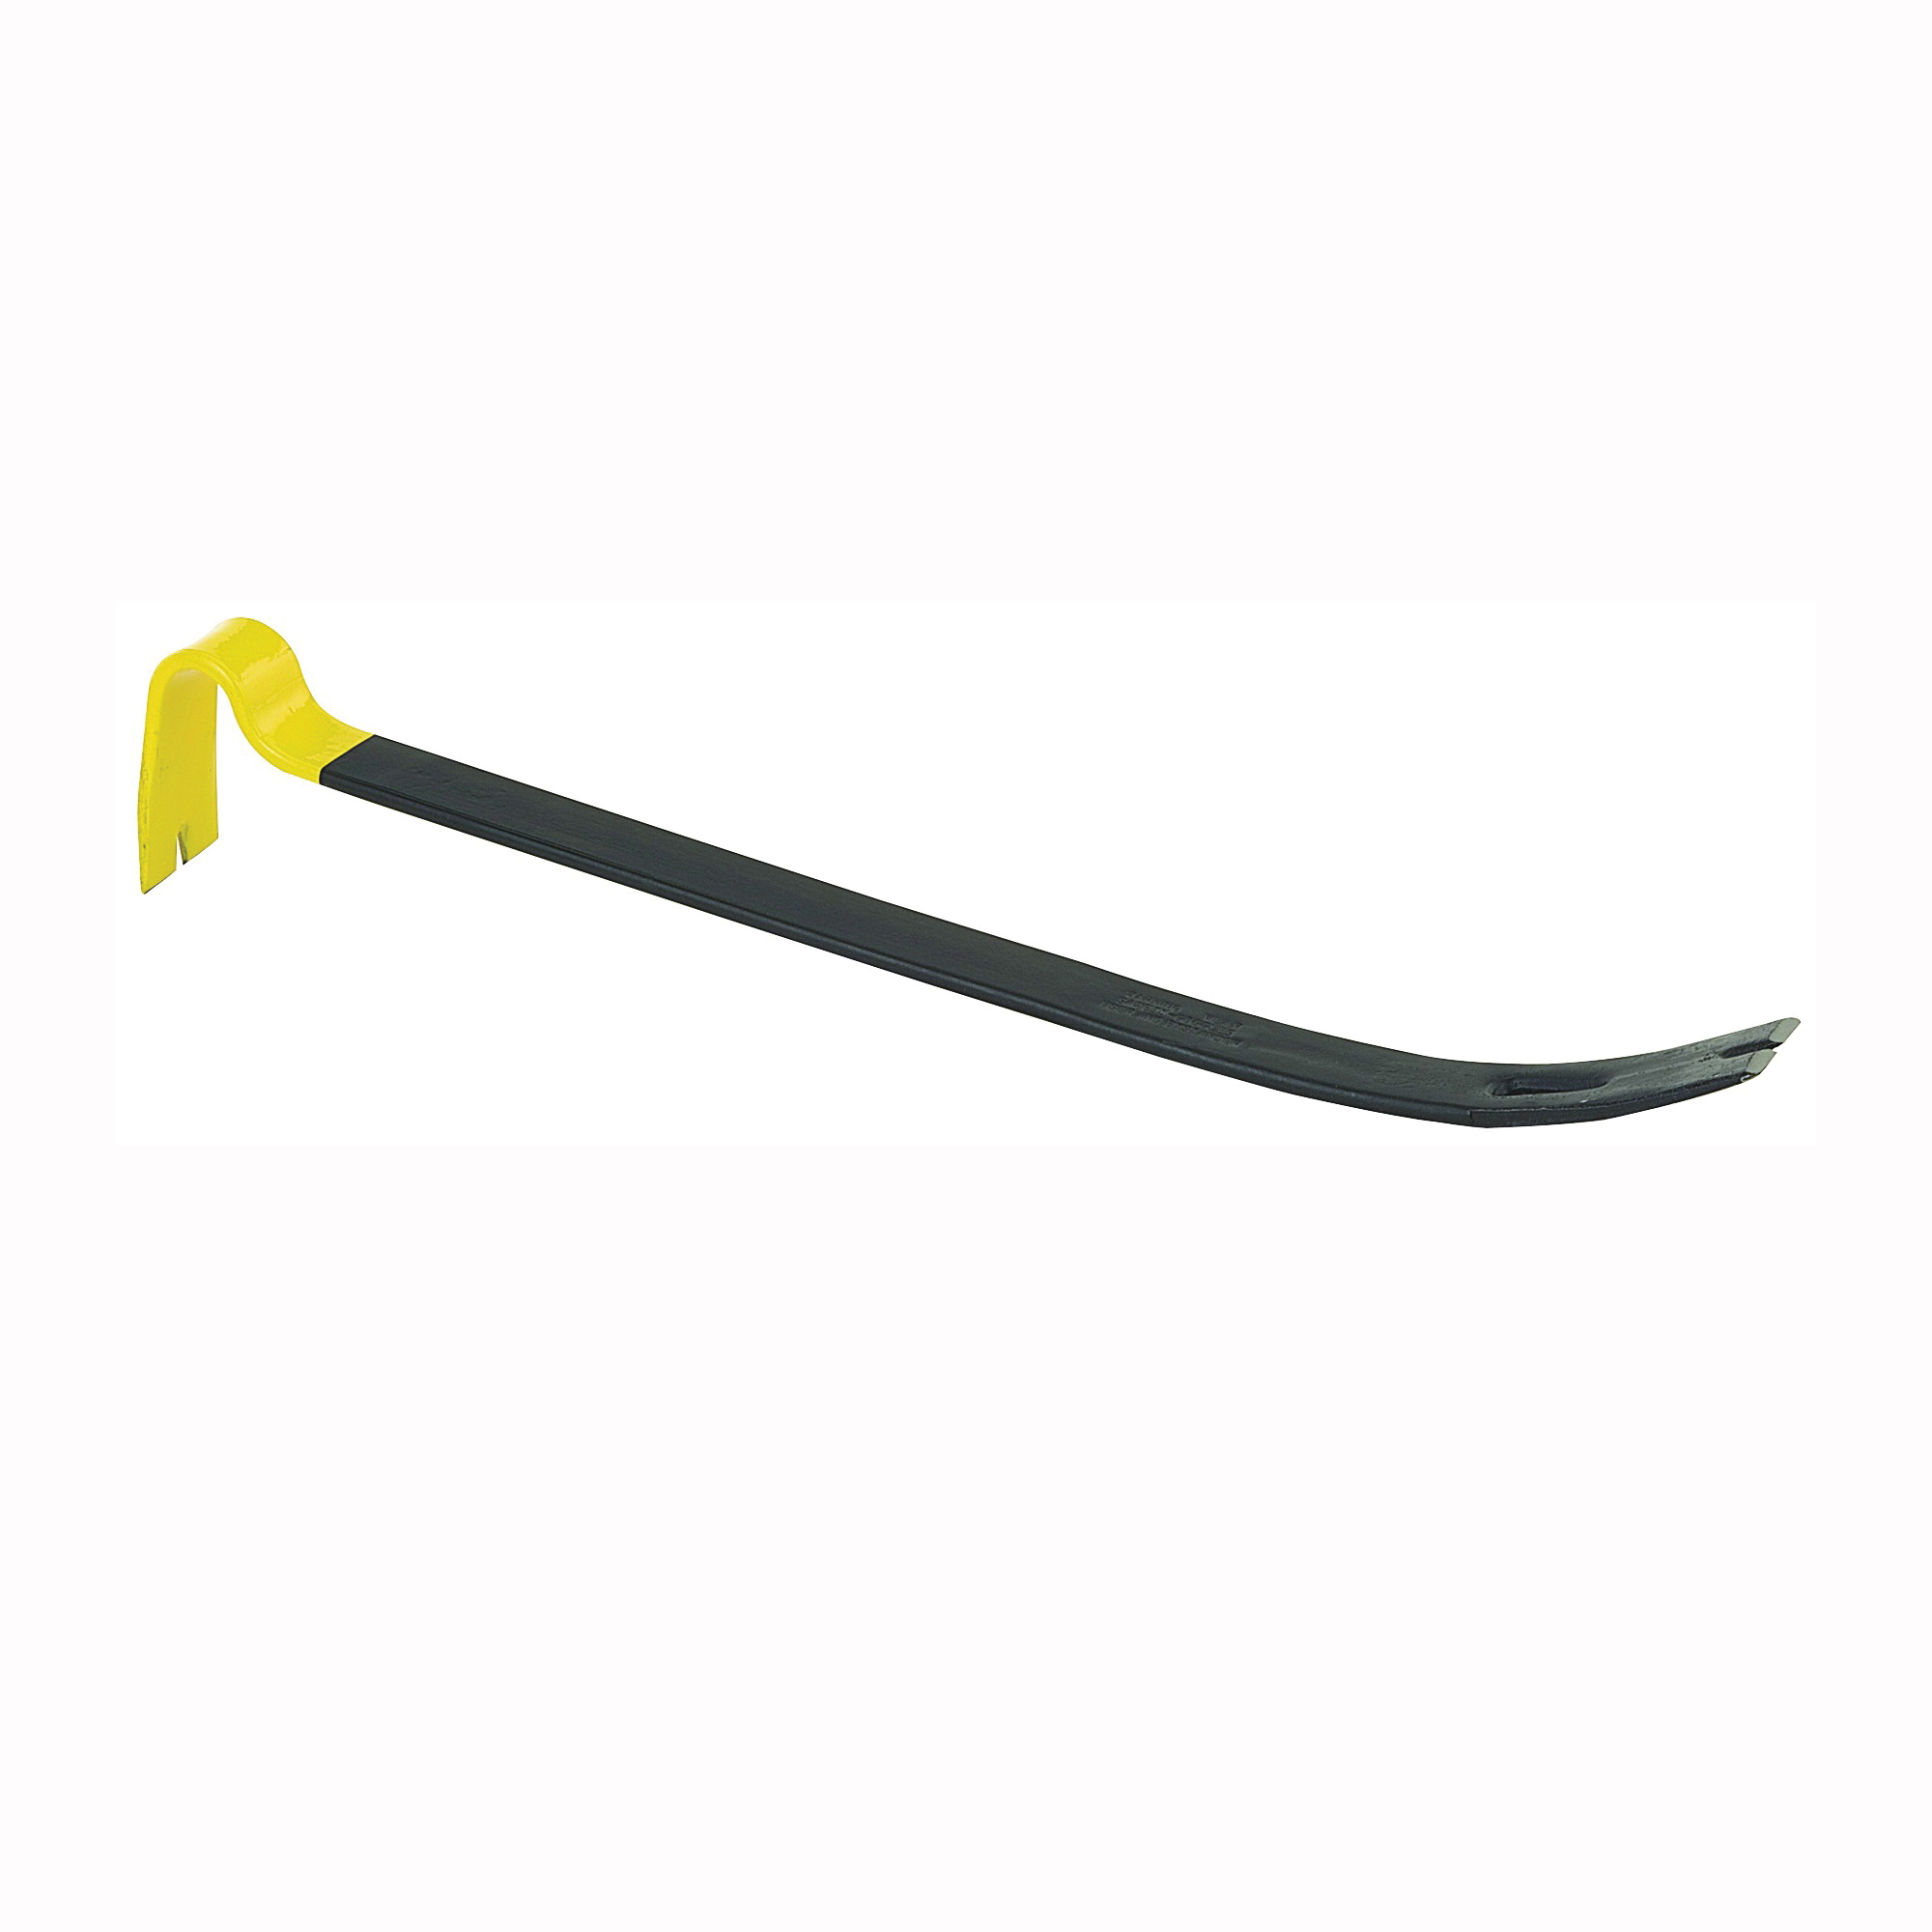 STANLEY 55-526 Pry Bar, 21 in L, Slotted Tip, 1-3/4 in W Tip, HCS, Black/Yellow, 1-3/4 in Dia - 1